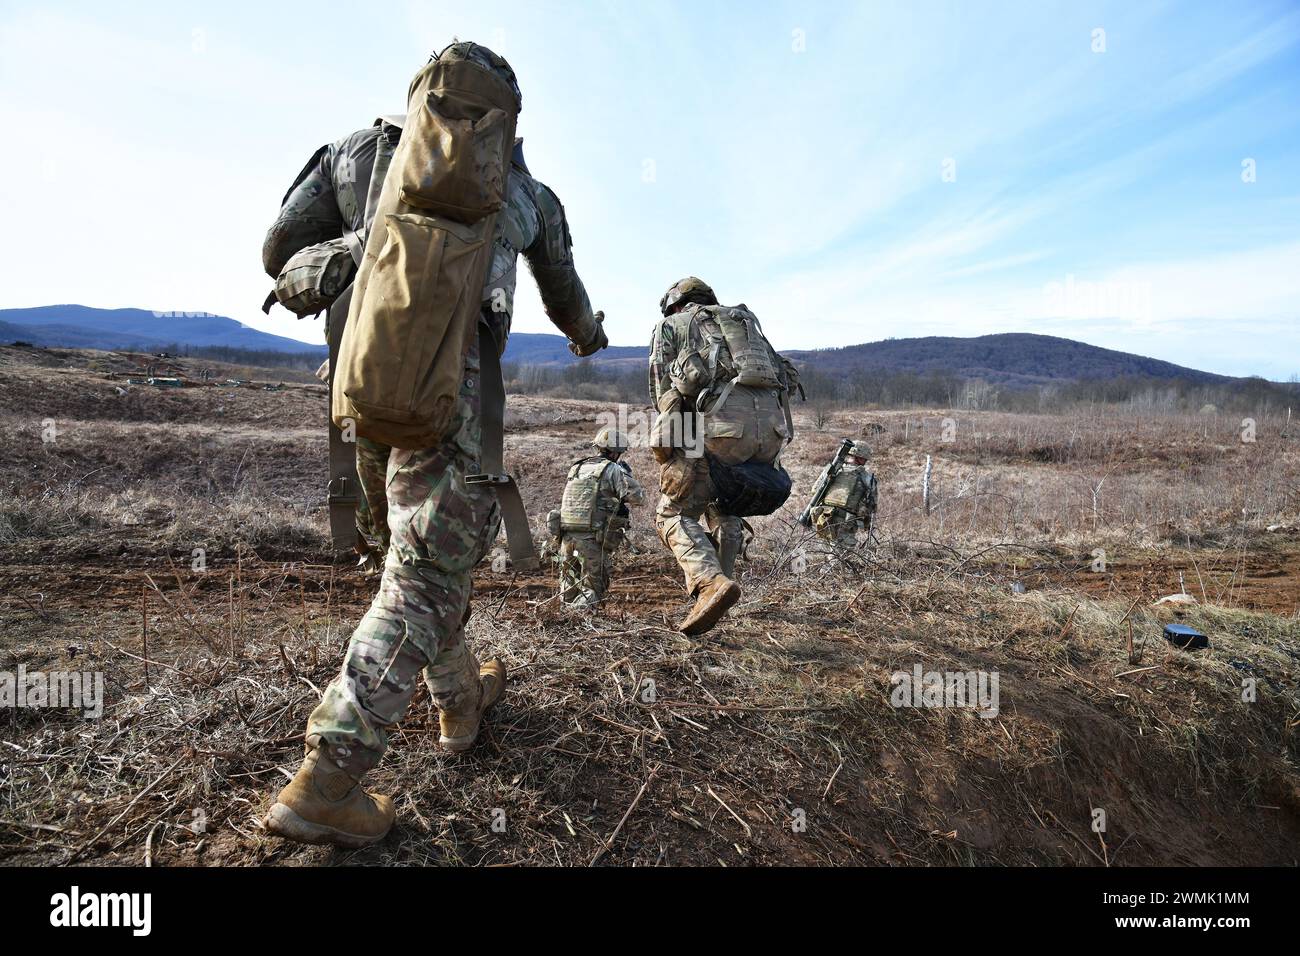 U.S. Army Paratroopers assigned to the 1st Battalion, 503rd Infantry Regiment, 173rd Airborne Brigade, move towards an objective during team live-fire and tactical movement training  as part of Eagle Ursa at the training range in Slunj, Croatia, Feb. 25, 2024. The 173rd Airborne Brigade is the U.S. Army's Contingency Response Force in Europe, providing rapidly deployable forces to the United States European, African, and Central Command areas of responsibility. Forward deployed across Italy and Germany, the brigade routinely trains alongside NATO allies and partners to build partnerships and s Stock Photo